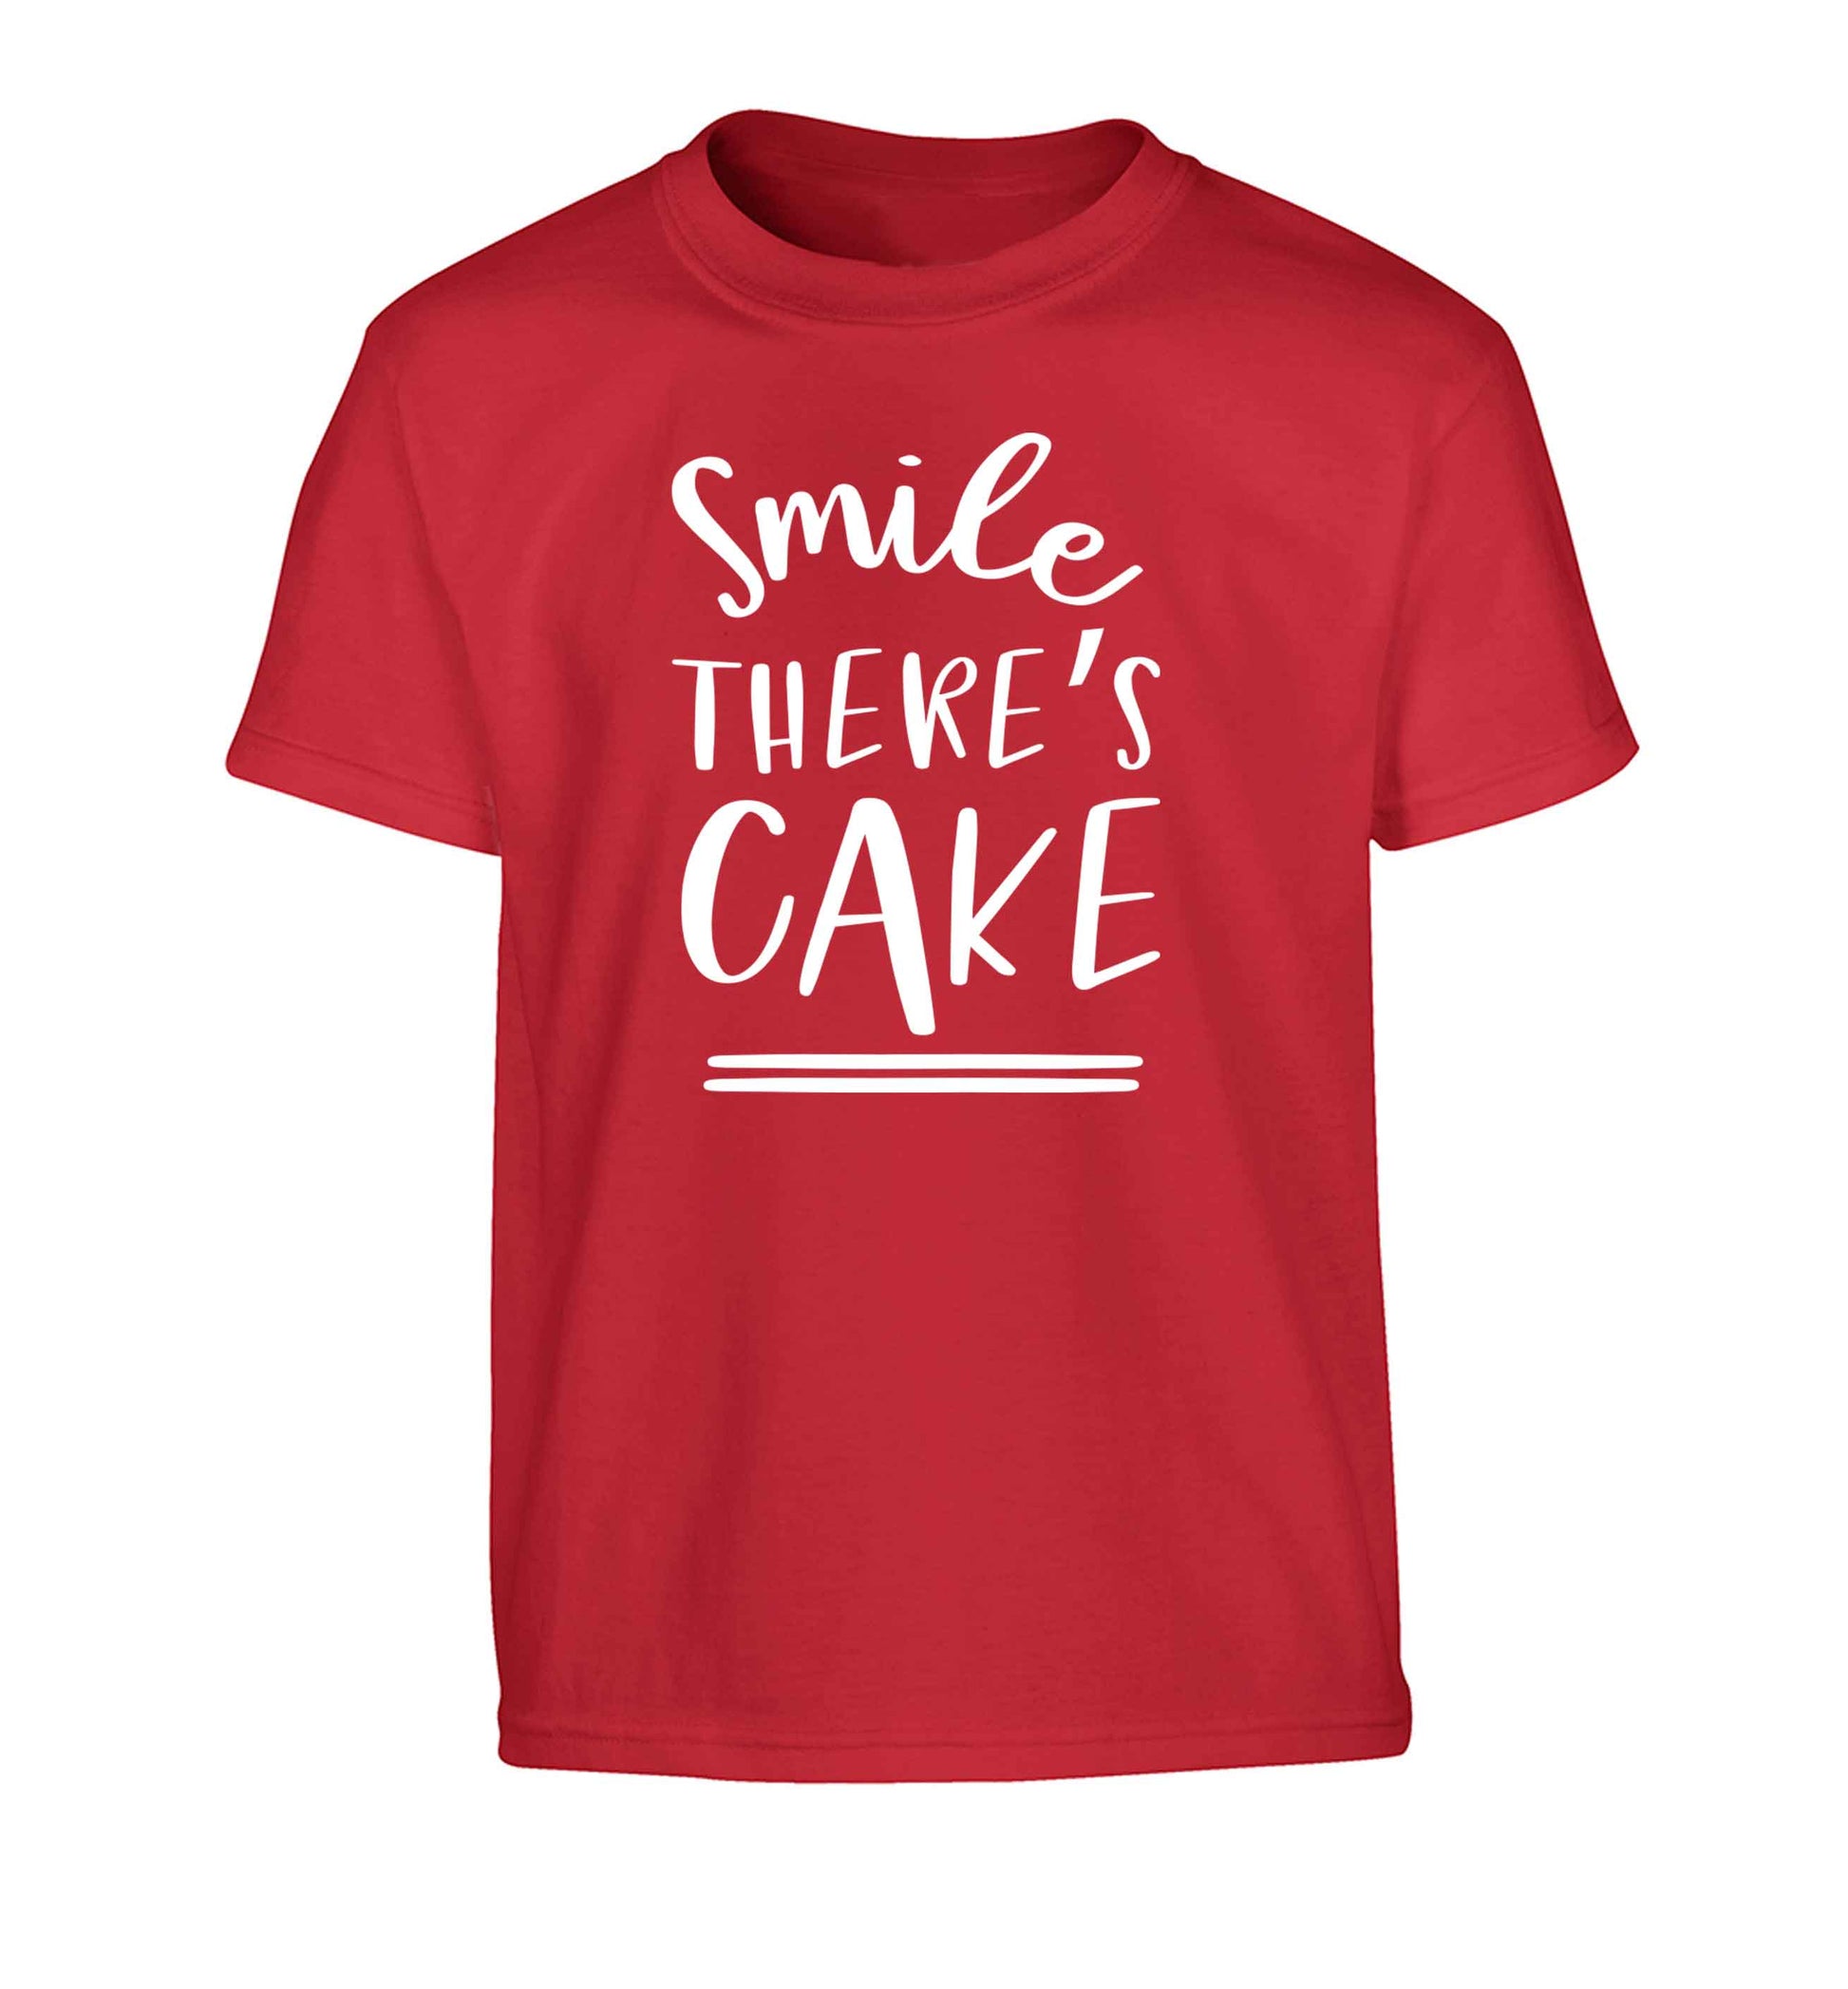 Smile there's cake Children's red Tshirt 12-13 Years